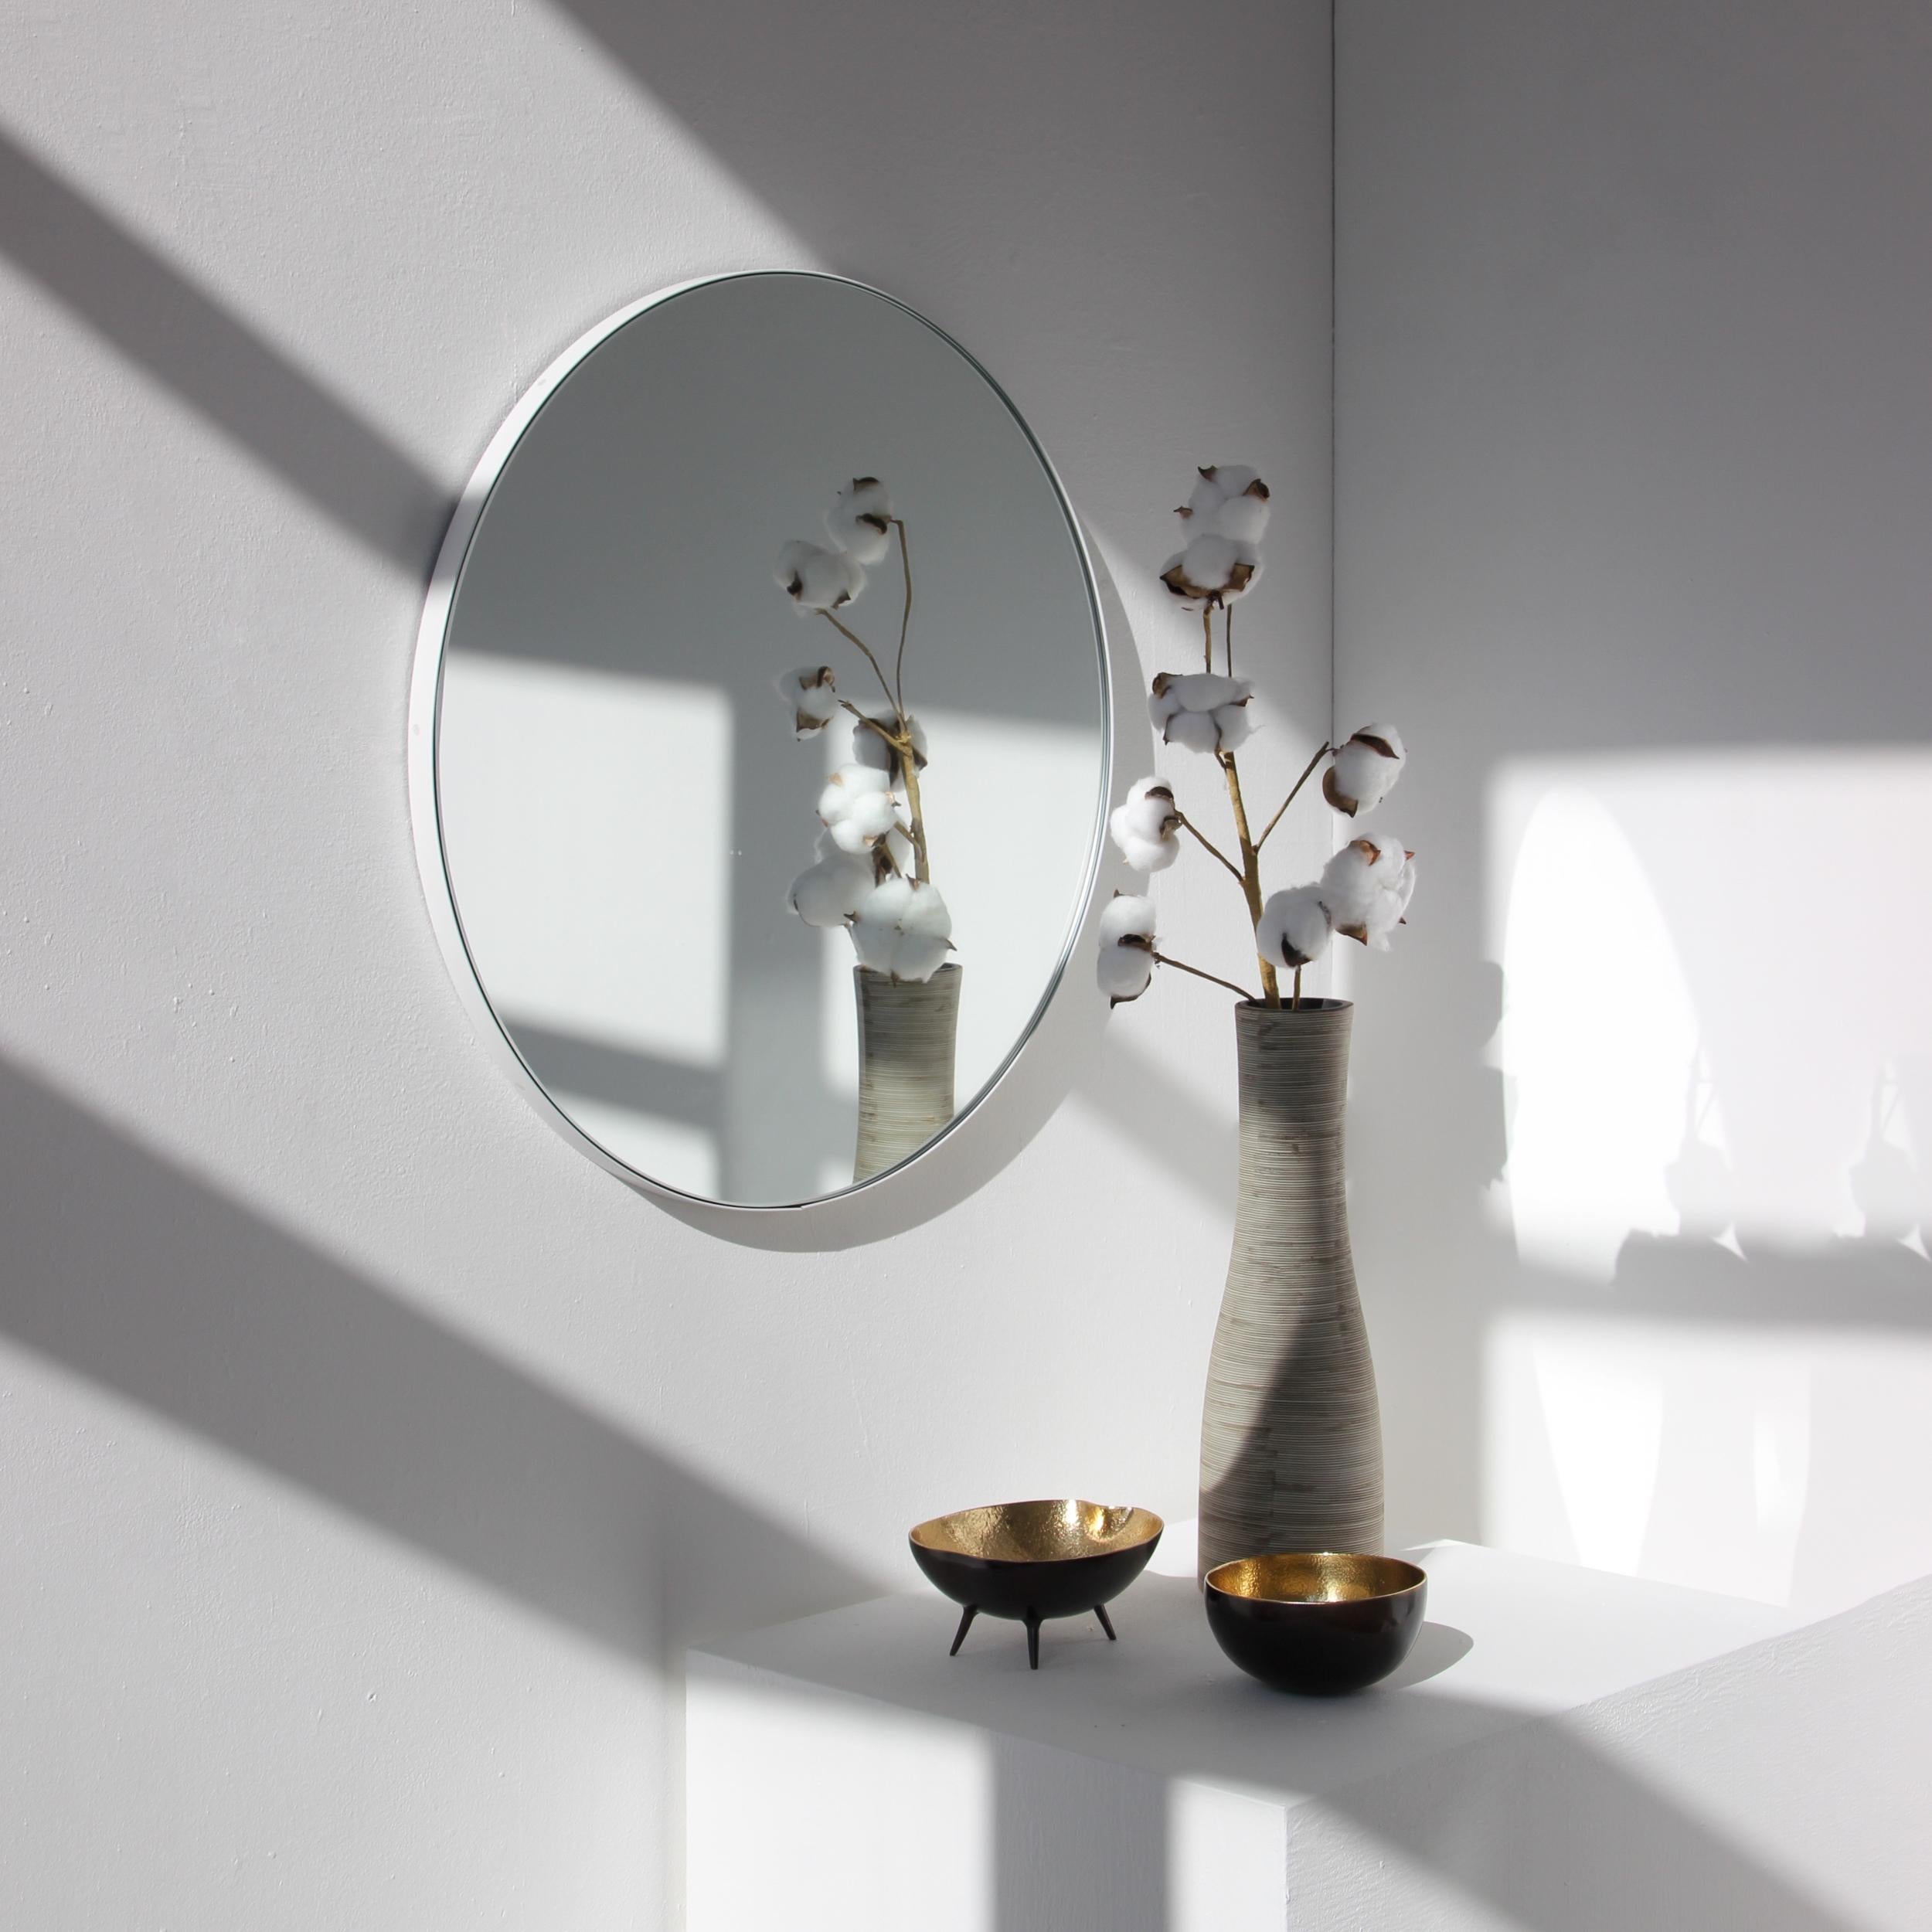 Minimalist round mirror with a modern aluminium powder coated white frame. Designed and handcrafted in London, UK.

Medium, large and extra-large mirrors (60, 80 and 100cm) are fitted with an ingenious French cleat (split batten) system so they may